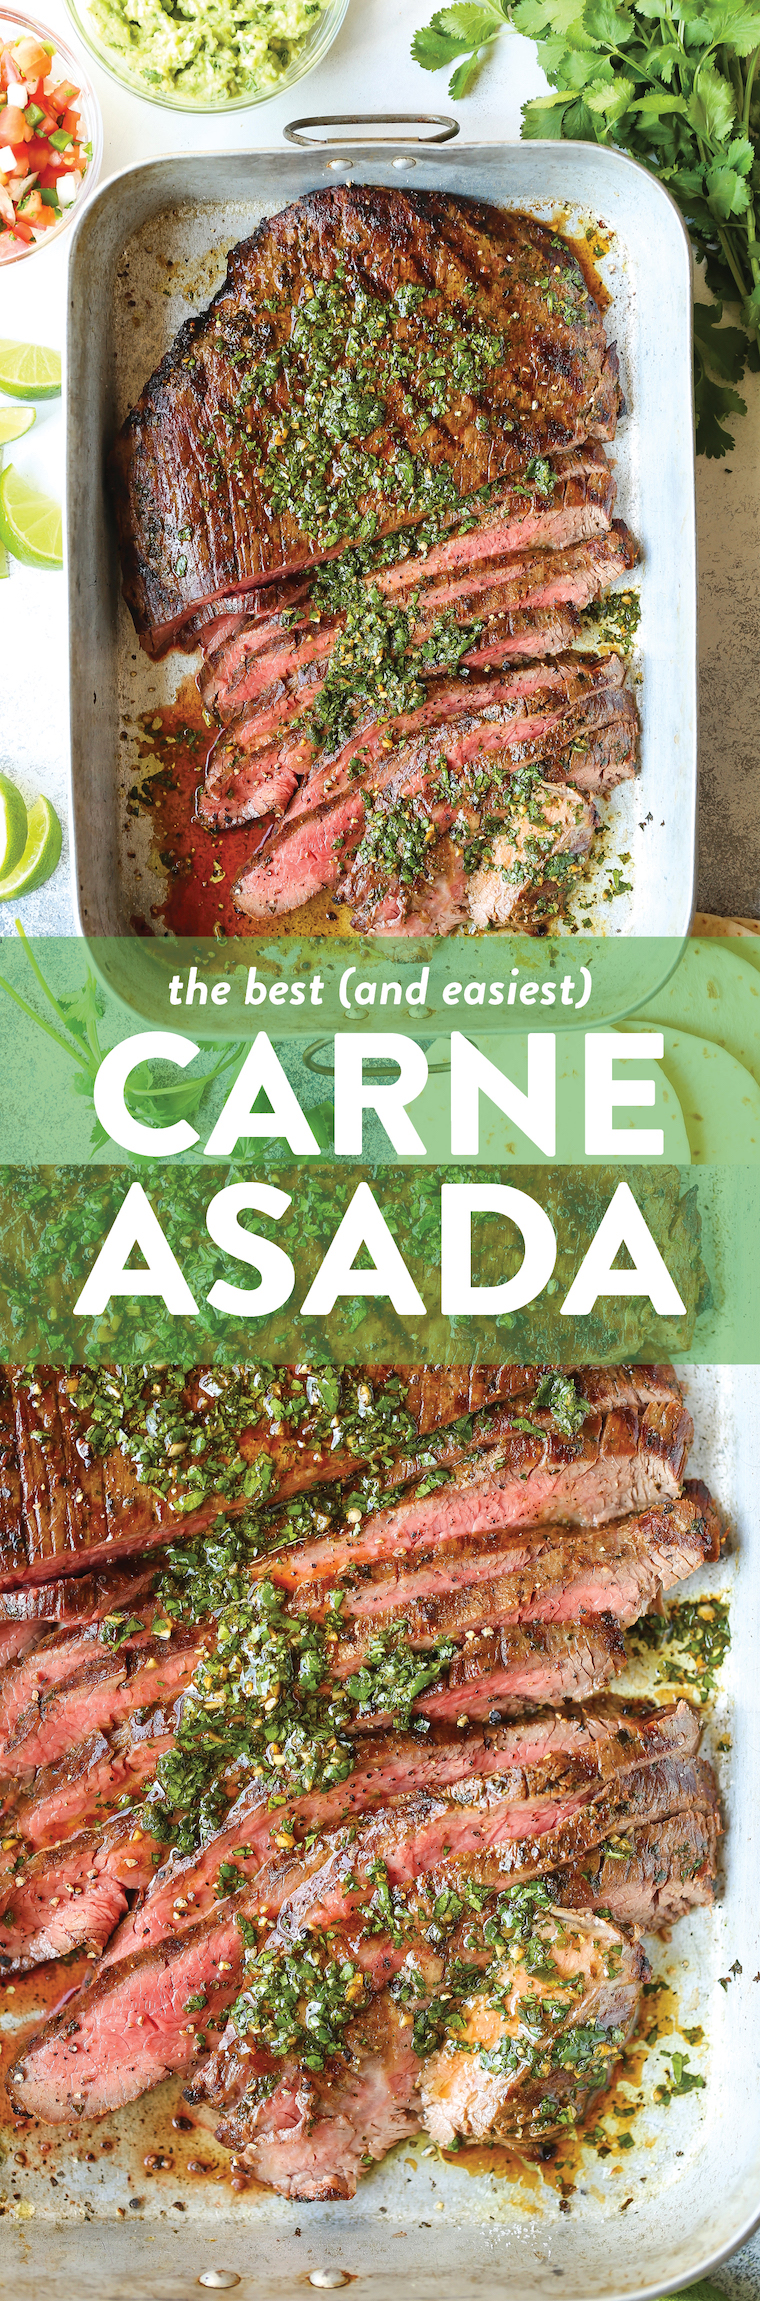 Carne Asada - Cilantro, olive oil, soy sauce, orange + lime juice, garlic, jalapeno and cumin make for the easiest and most flavorful marinade. SO SO GOOD.